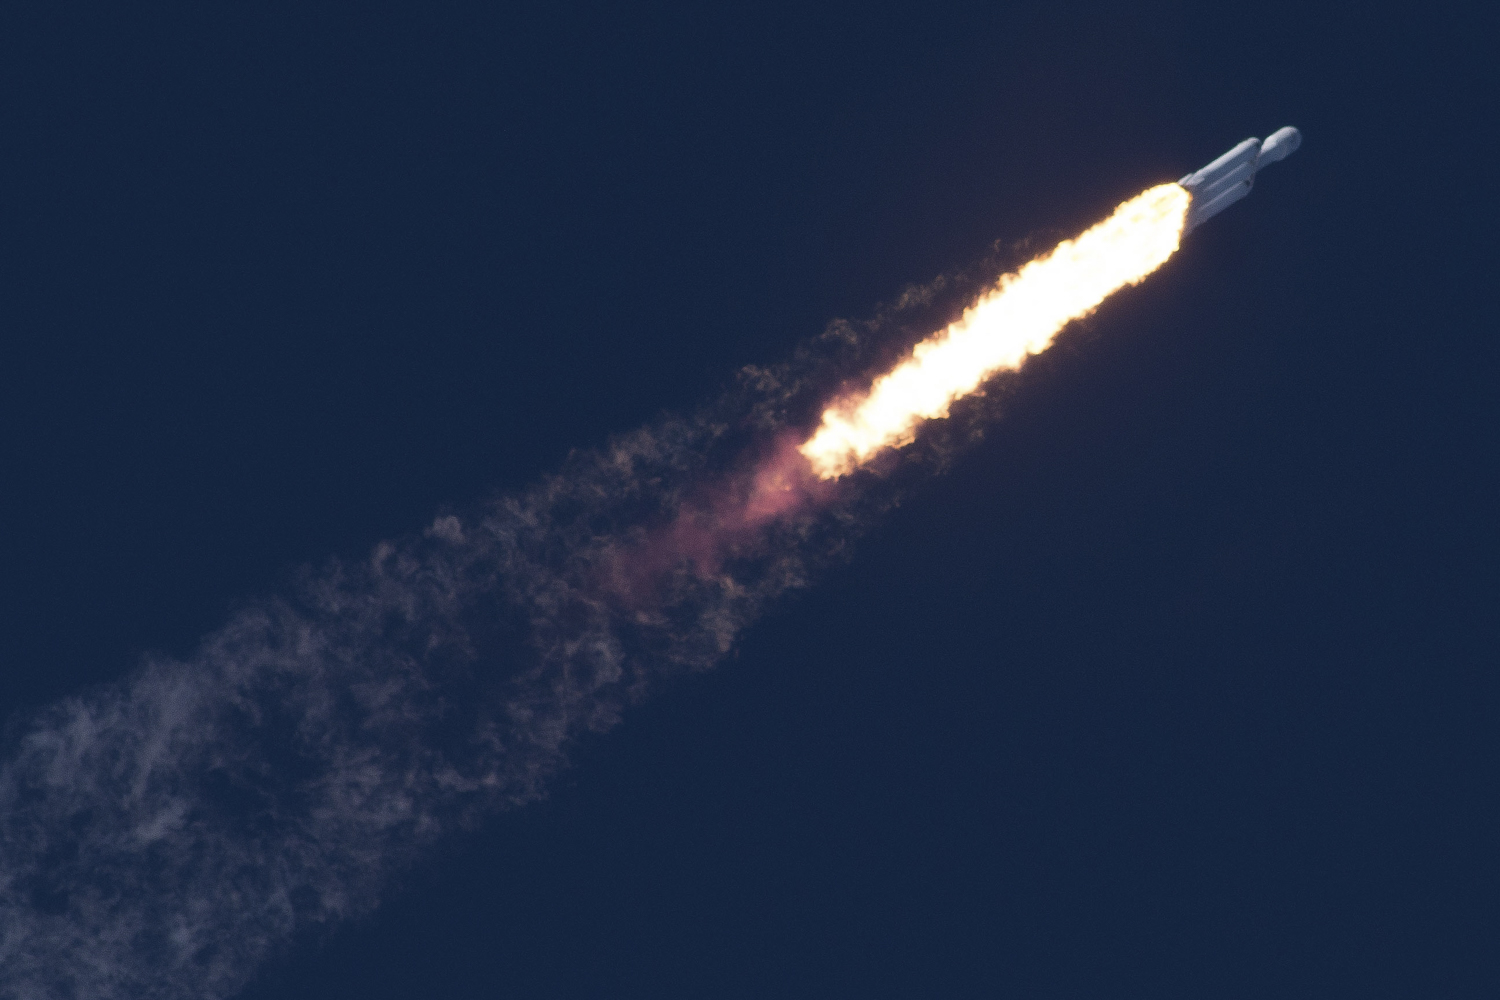 spacex falcon heavy launch success test flight flickr 1219